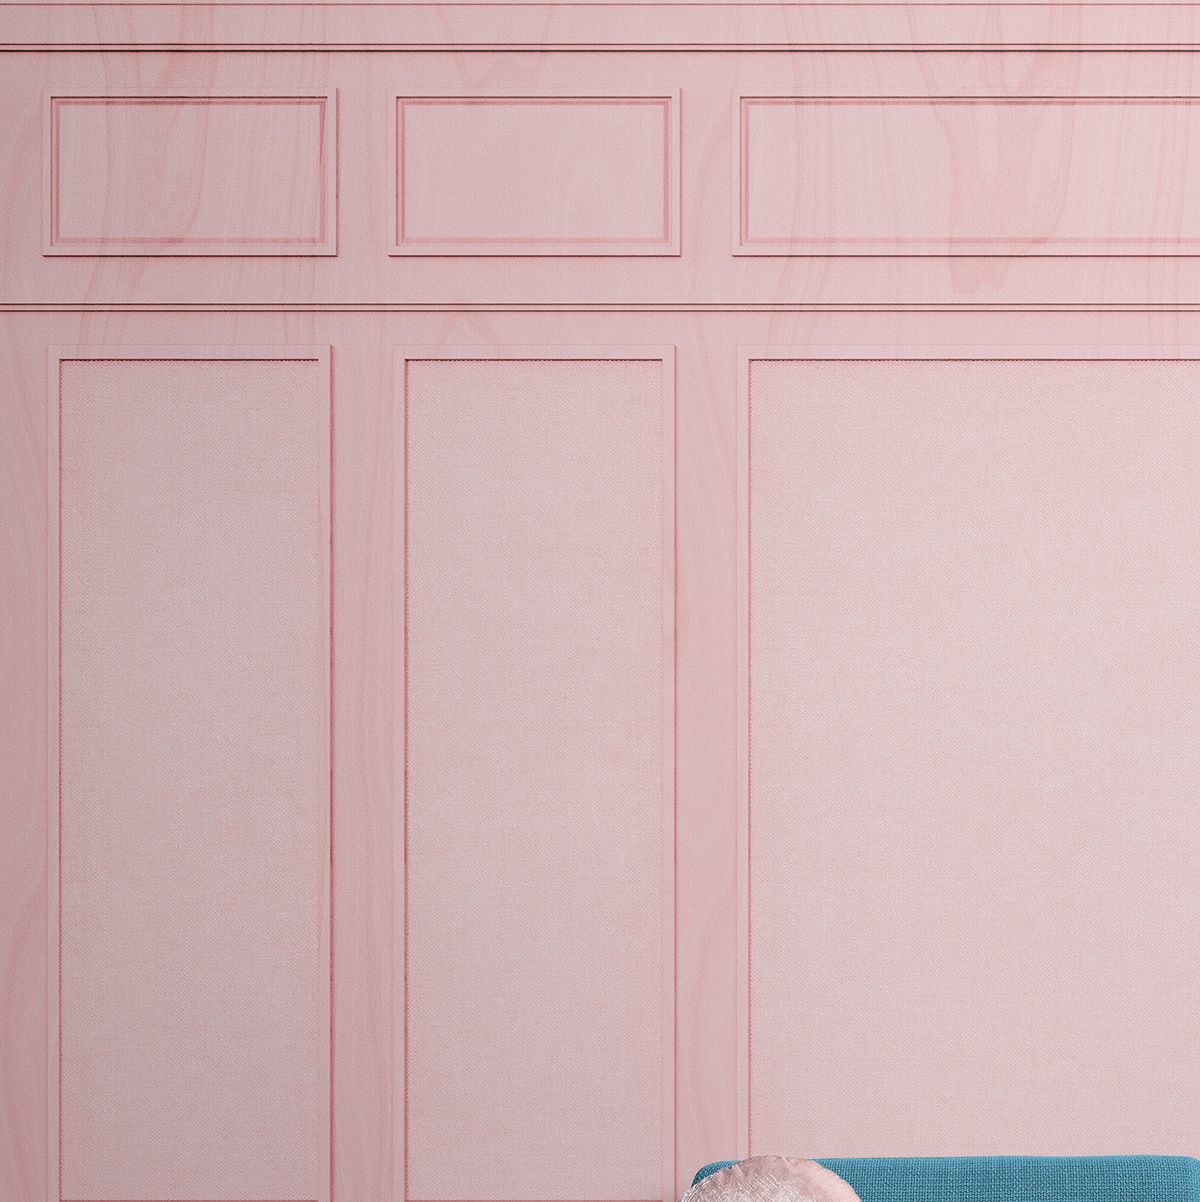 Wes Anderson Inspired Wallpaper, Domino